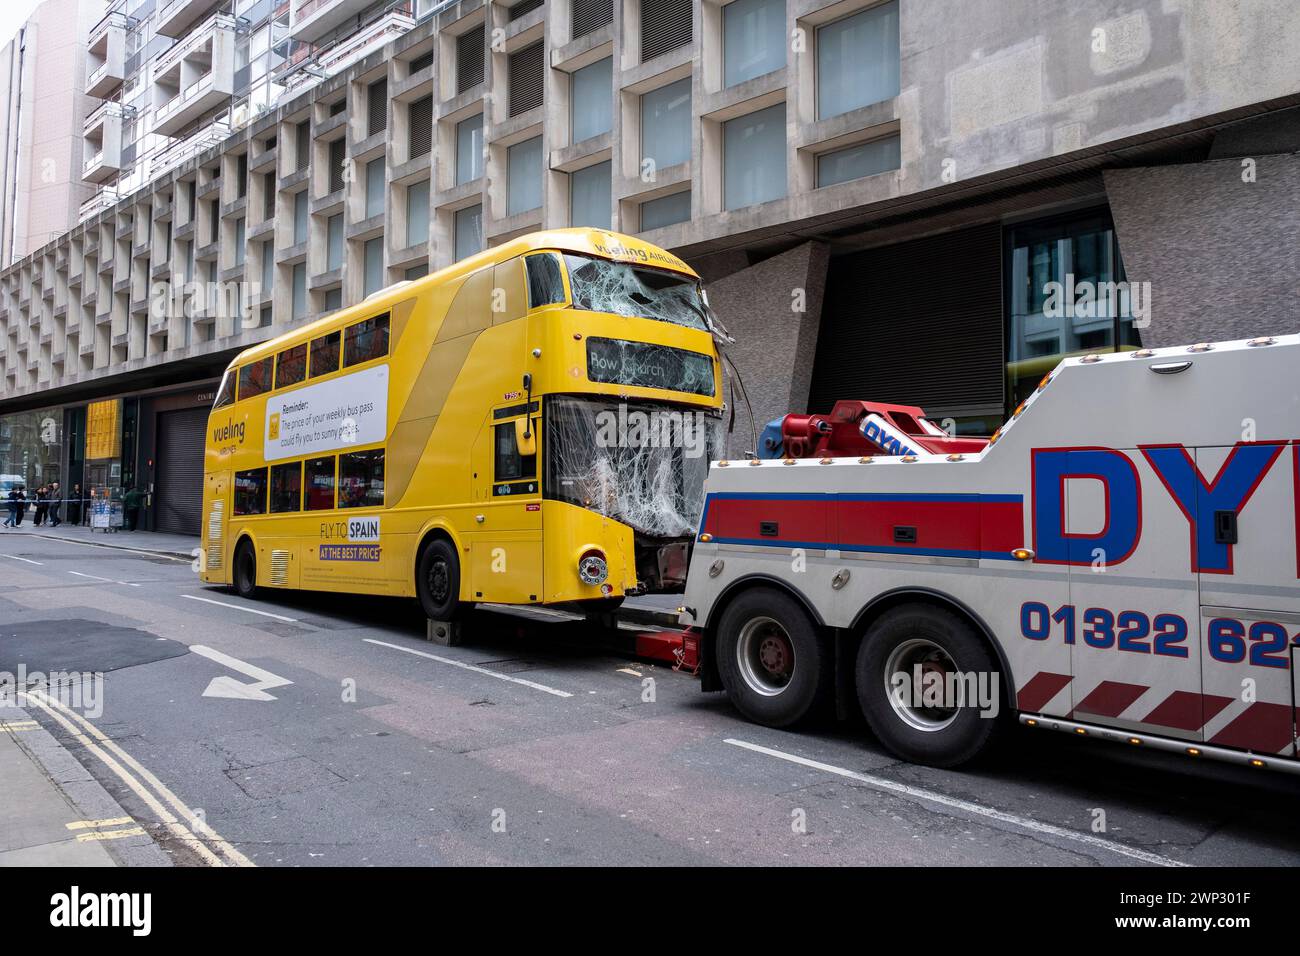 Aftermath of a double-decker bus crash which took place on New Oxford Street, and which was hitched to a recovery vehicle on 5th March 2024 in London, United Kingdom. Emergency services cordoned off the area following the accident in which a yellow Routemaster bus crashed into an empty building which was under redevelopment. No one has been reported as being seriously injured although one person was taken away for treatment. Stock Photo